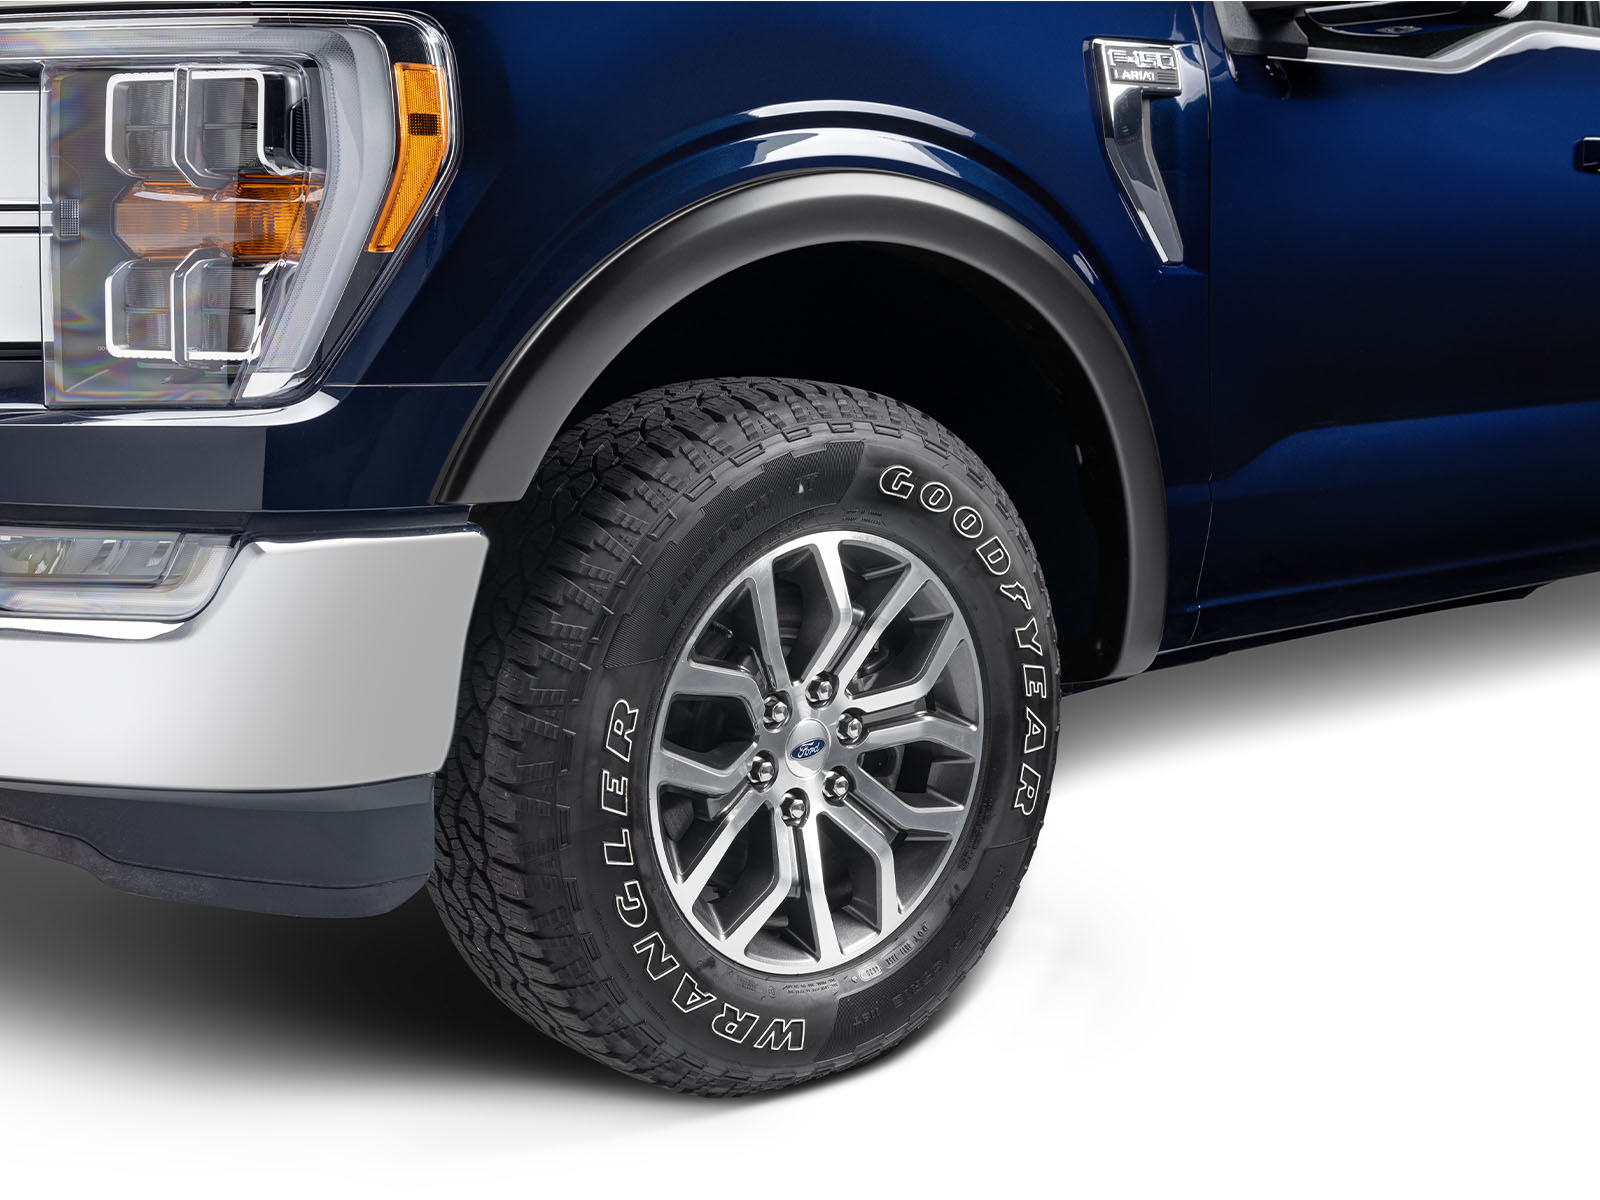 Details about   Stampede 8610-5 Pair of Front & Rear Original Riderz Fender Flares for Ford F150 